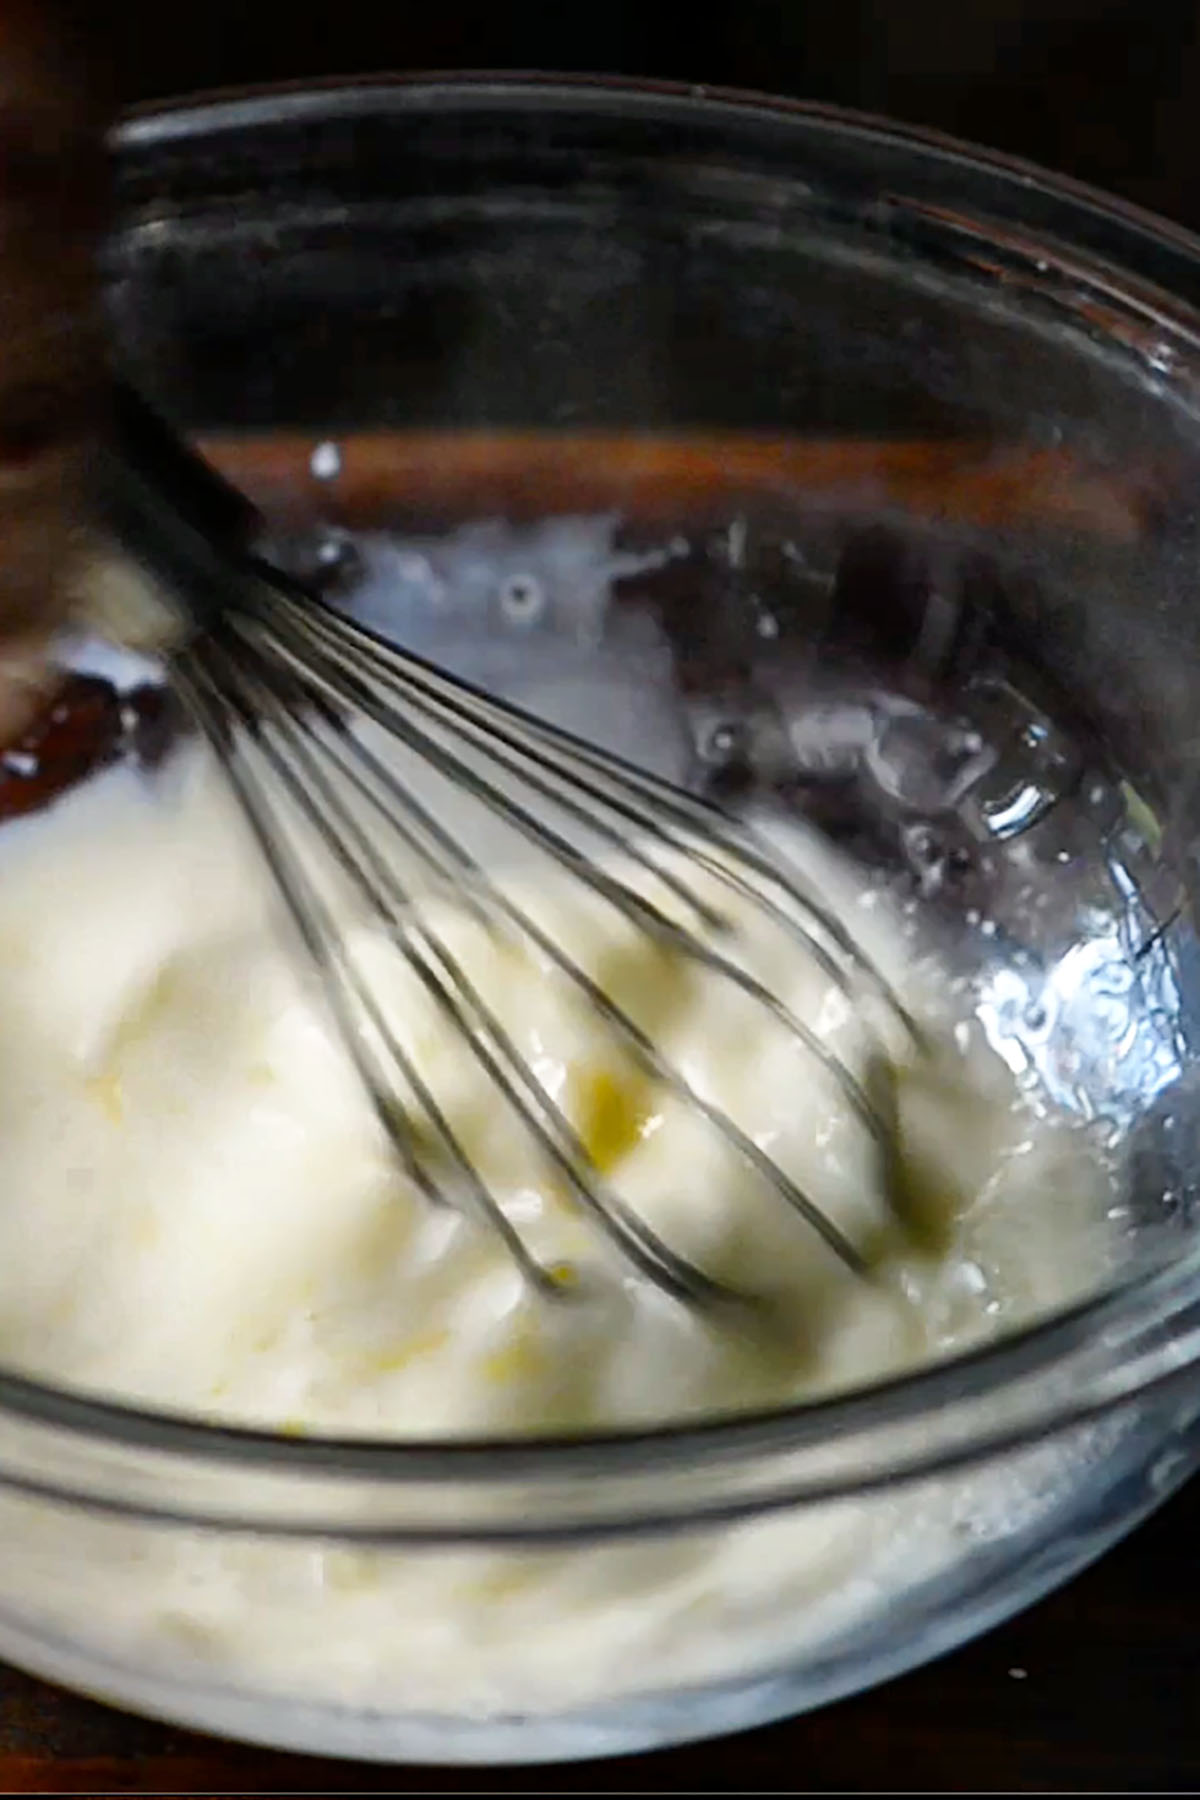 Pancake batter being whisked in a glass mixing bowl.